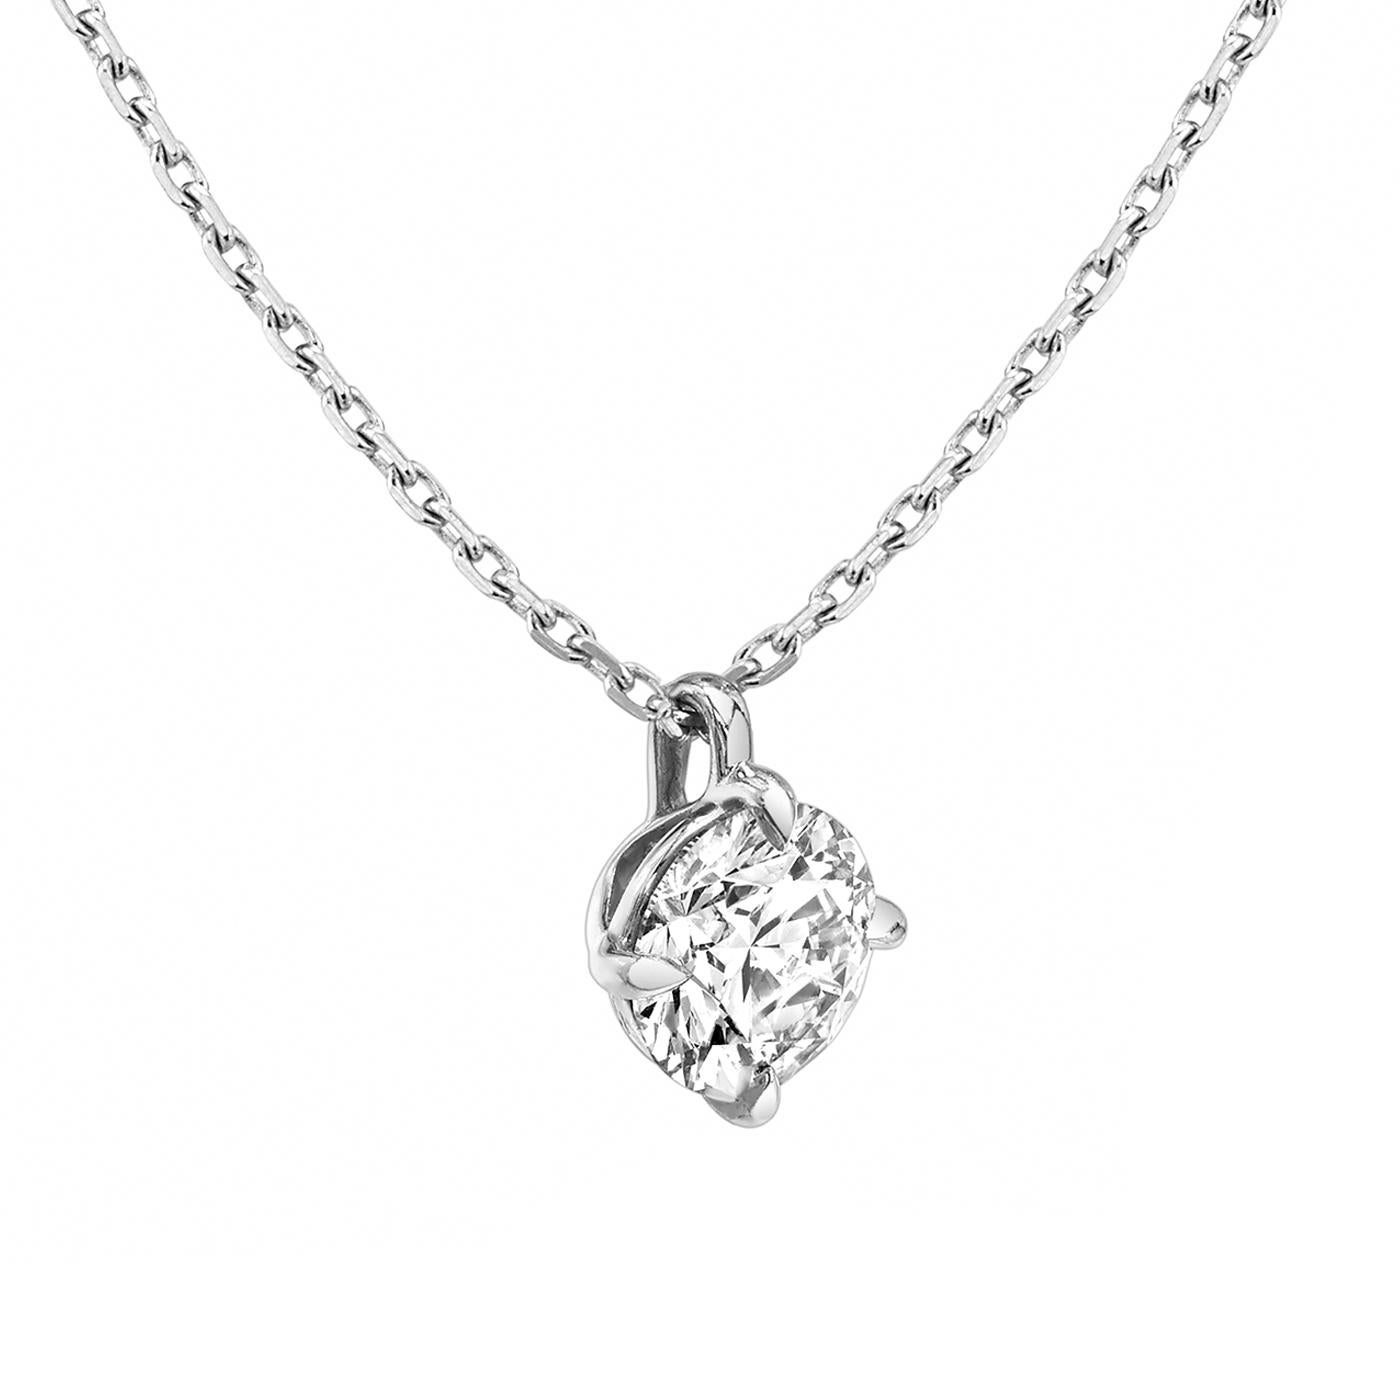 This exquisite necklace features a dazzling round diamond pendant natural cut round diamond in platinum. It has Si1 Clarity and J Color Totaling 1.60 Carat, It offers delicate beauty and comfortable wearability. Ideal as an anniversary or birthday